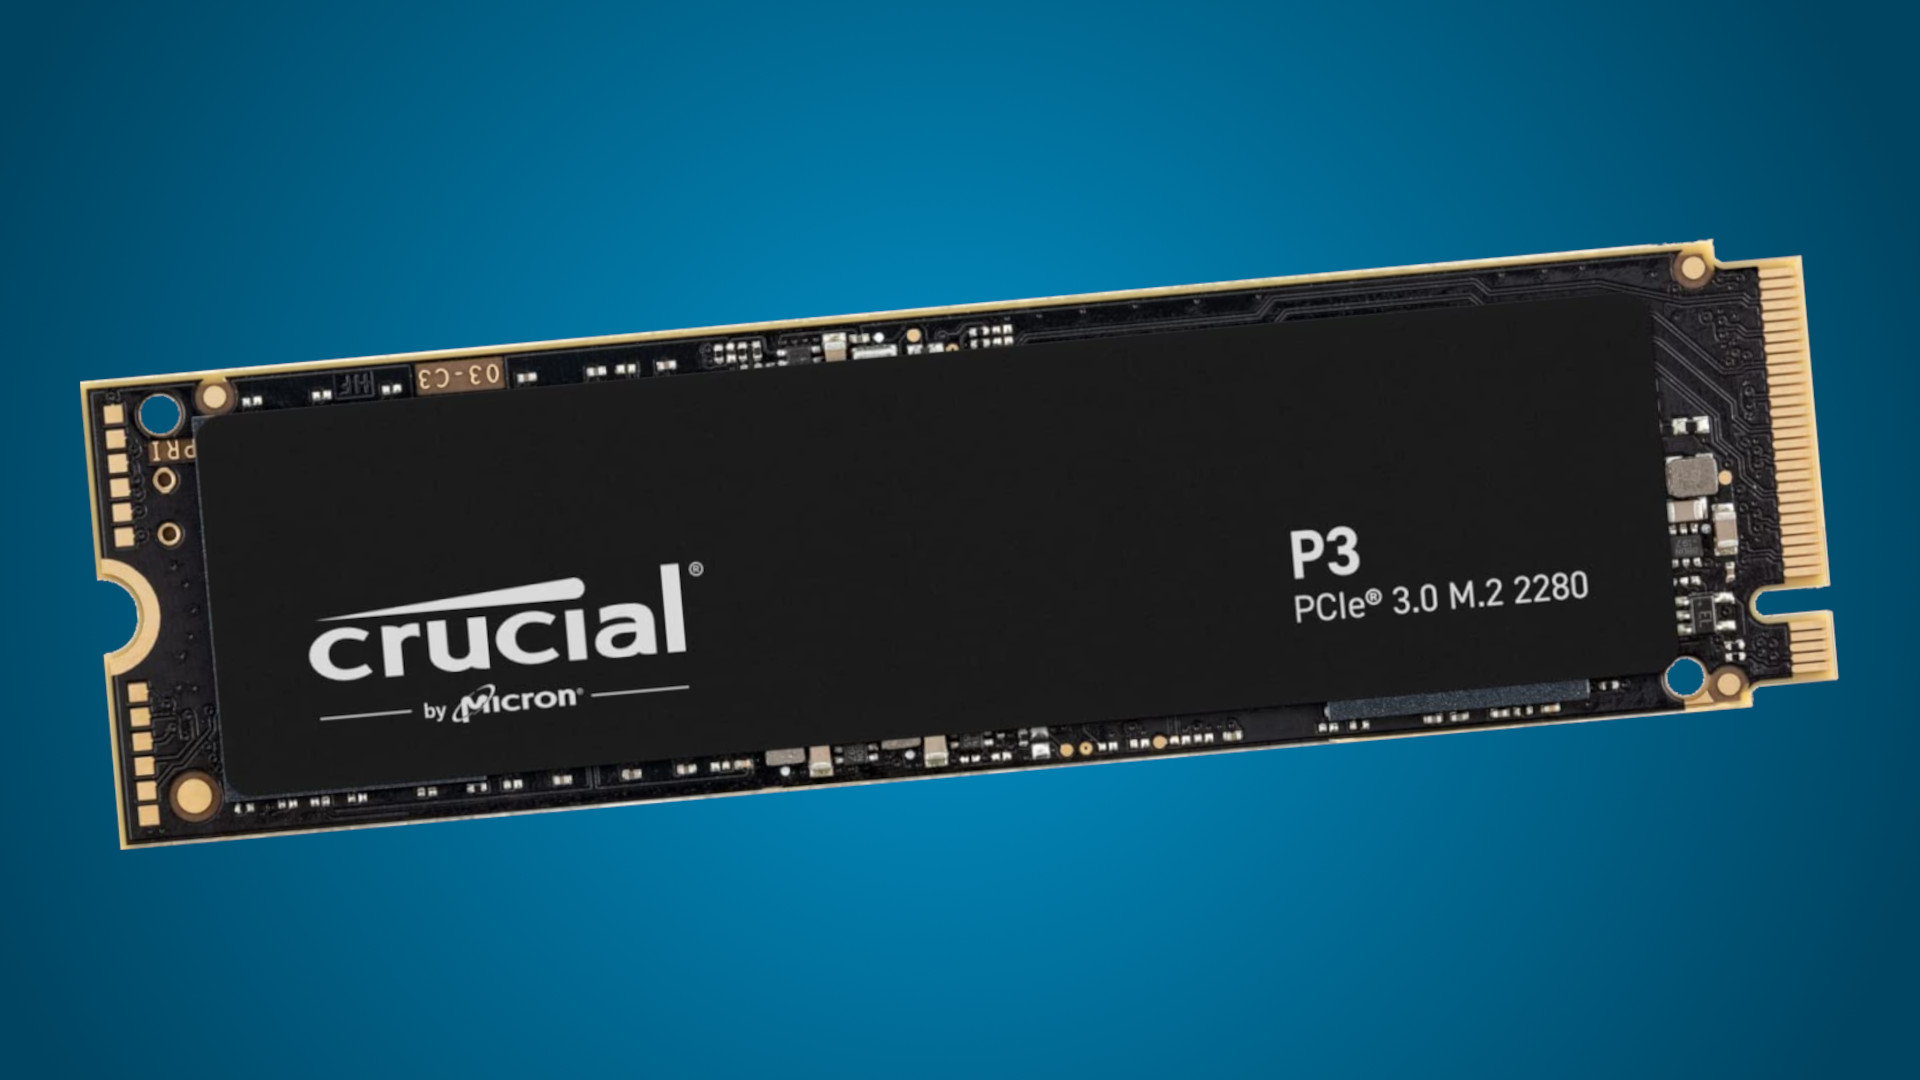 Crucial P3 1TB M.2 NVMe SSD is at its lowest price ever on Amazon